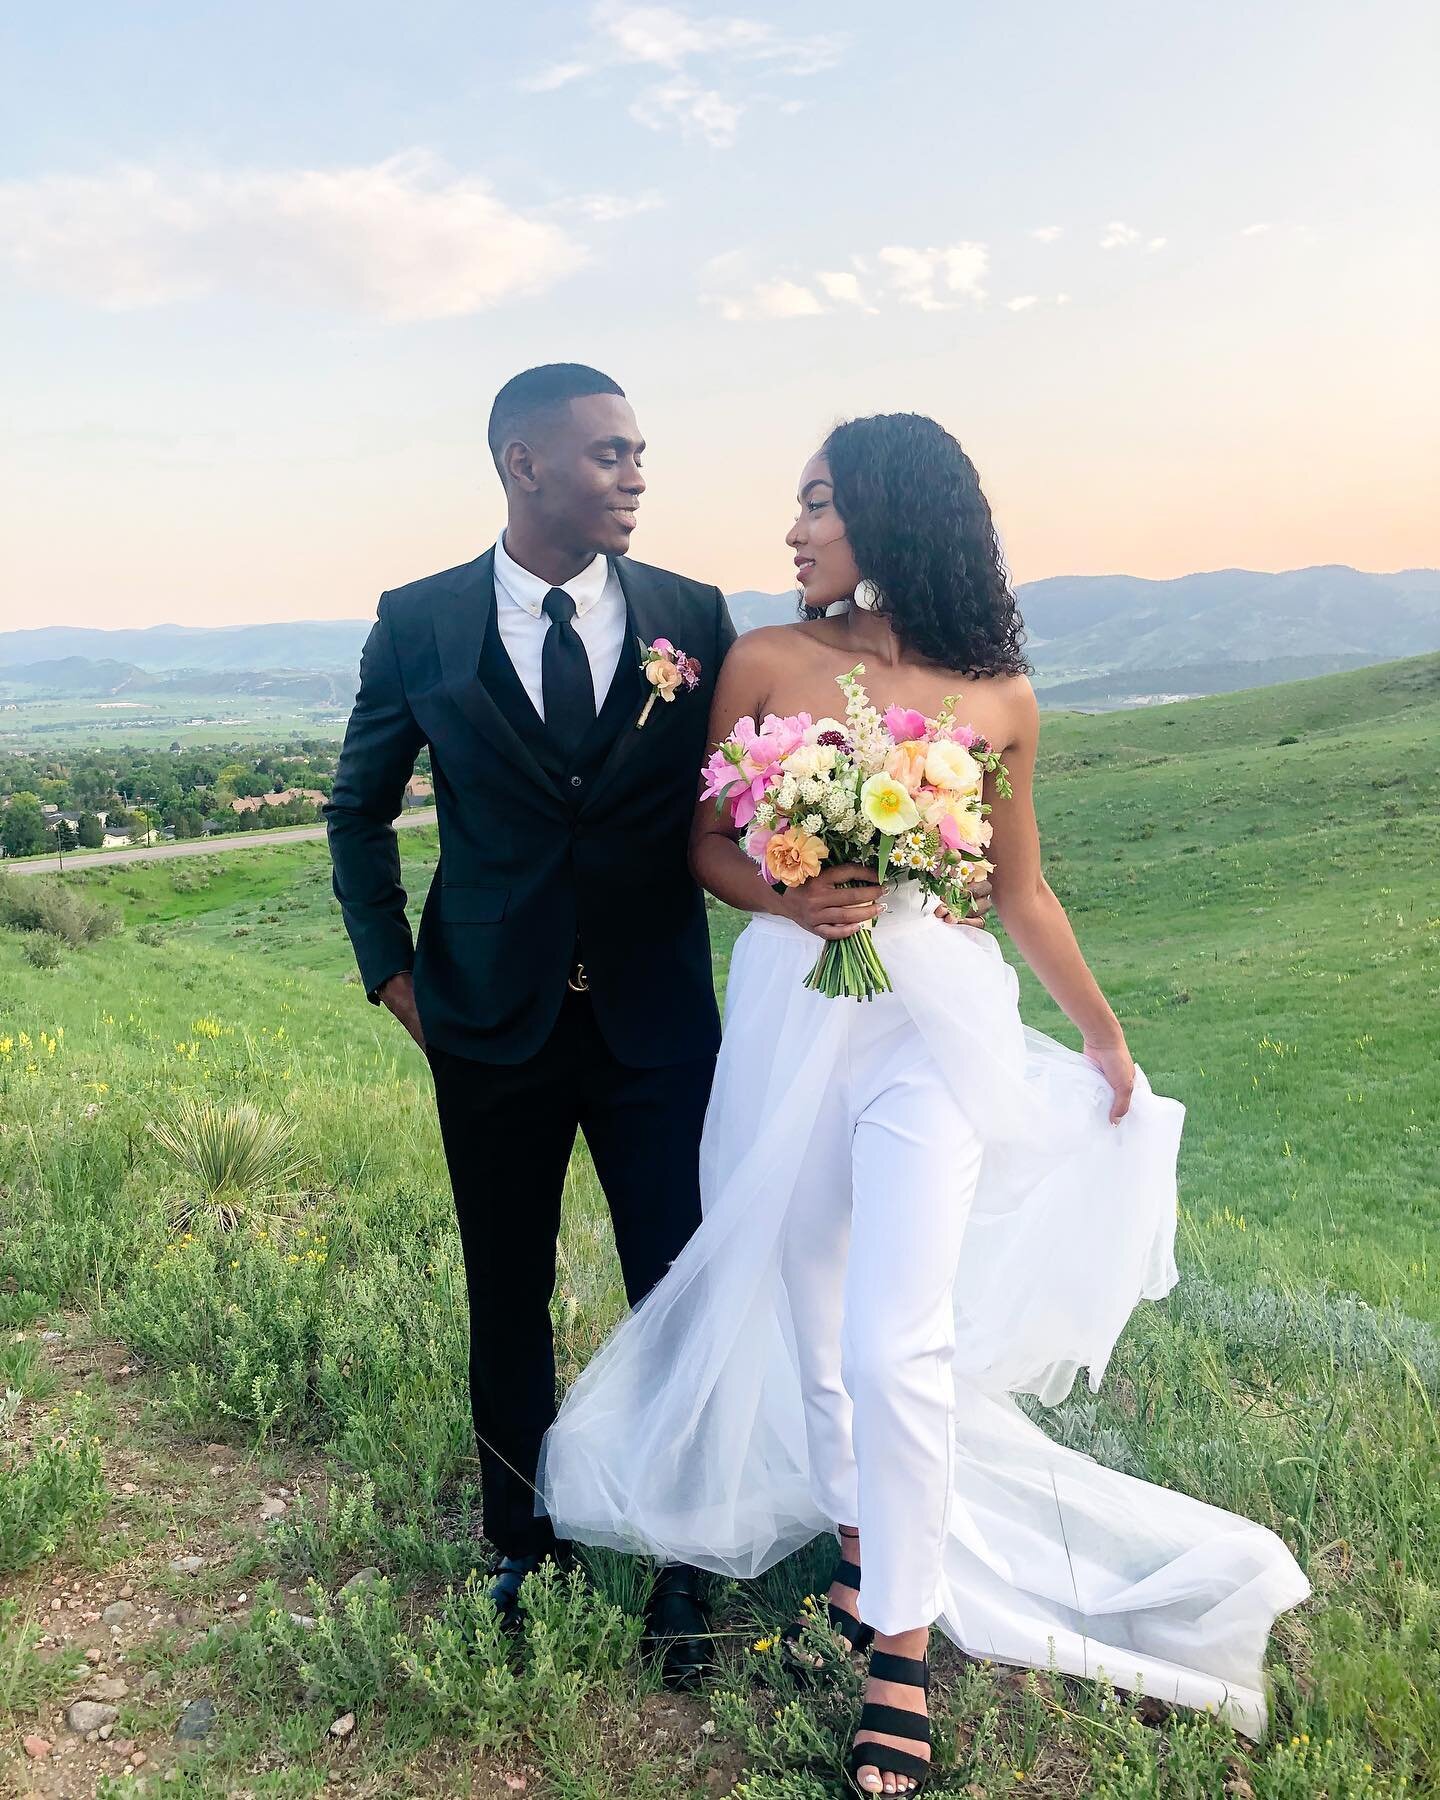 Sneak peek of this week&rsquo;s styled elopement. Rolling green hills, wildflowers, and perfect weather made for an amazing backdrop. 

It was so great to work with this dream team! Looking forward to more collabs in the future 🤍.

Organizer: @amyla